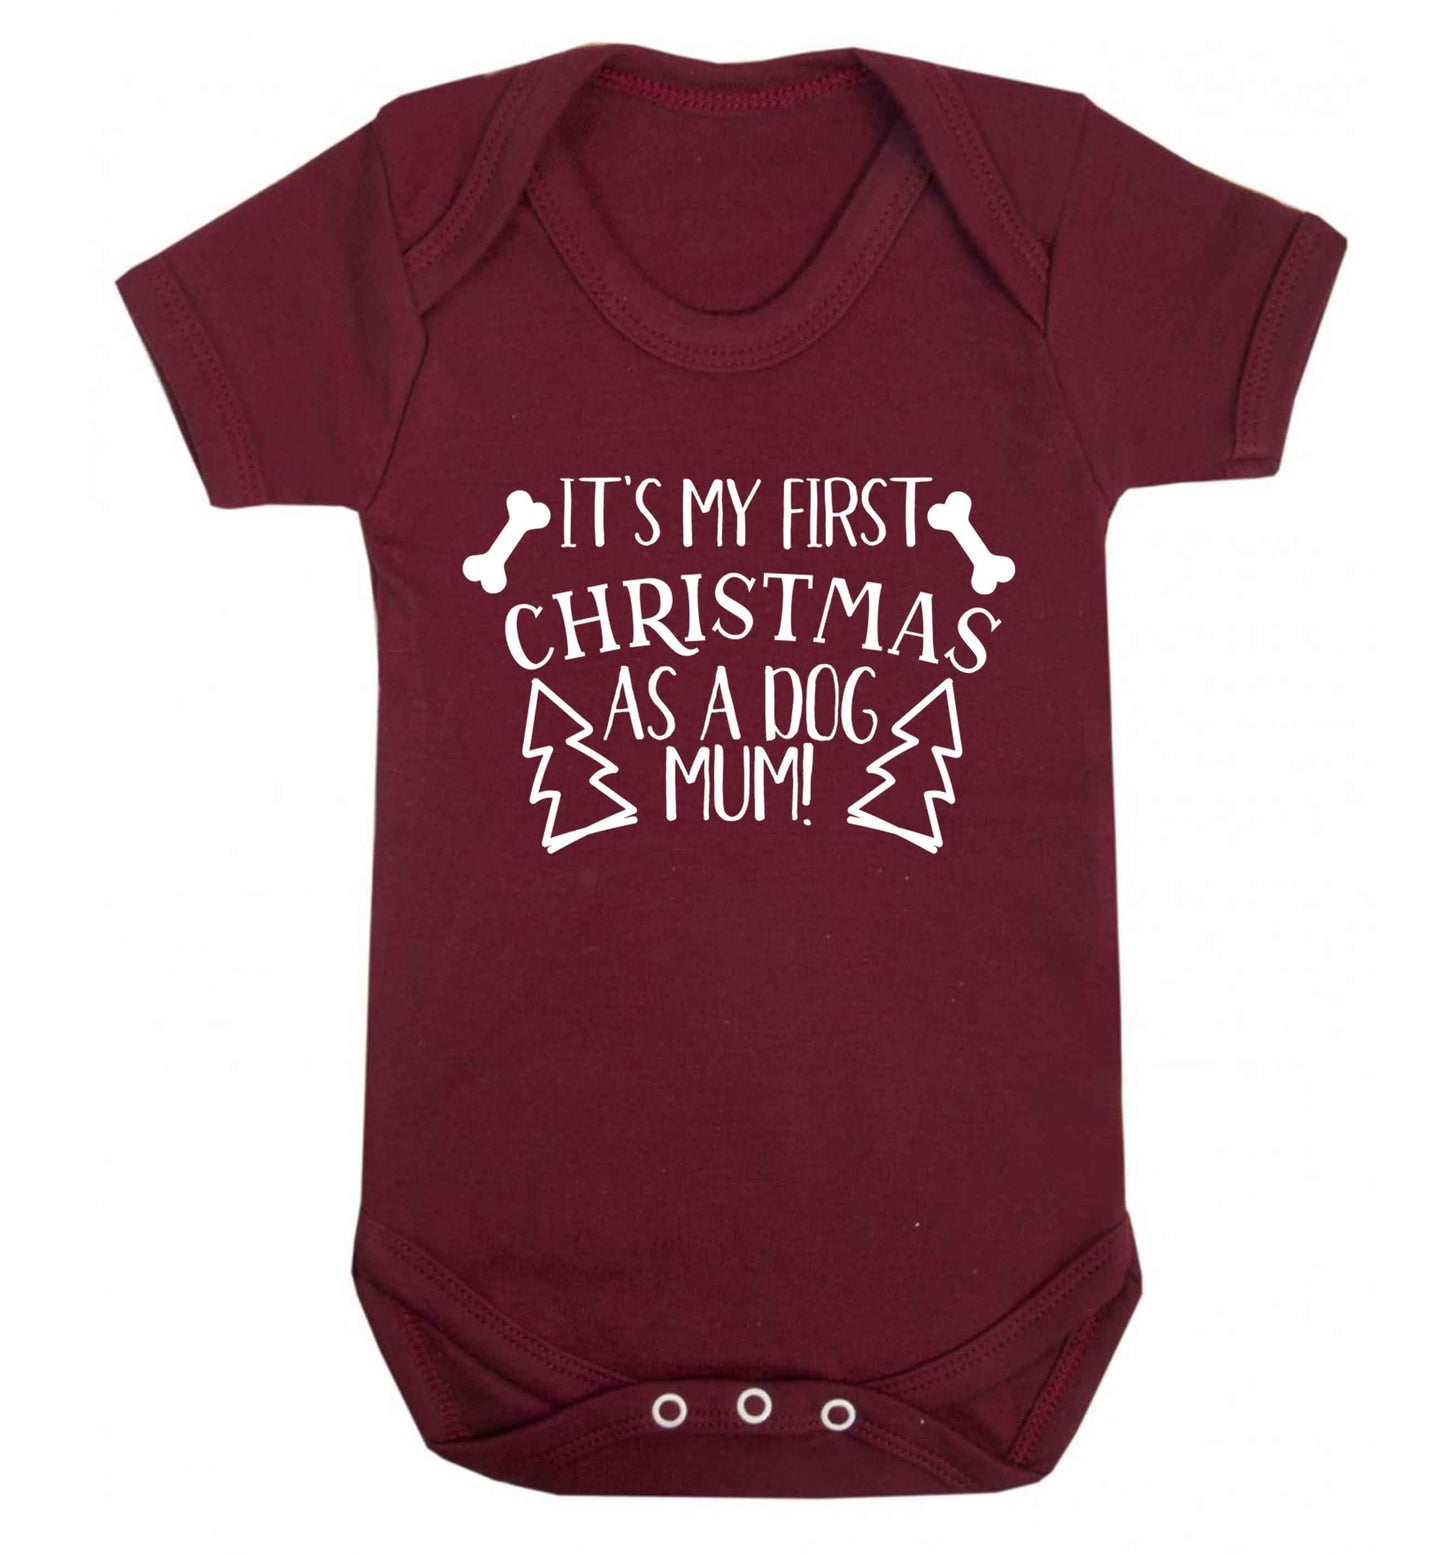 It's my first Christmas as a dog mum! Baby Vest maroon 18-24 months